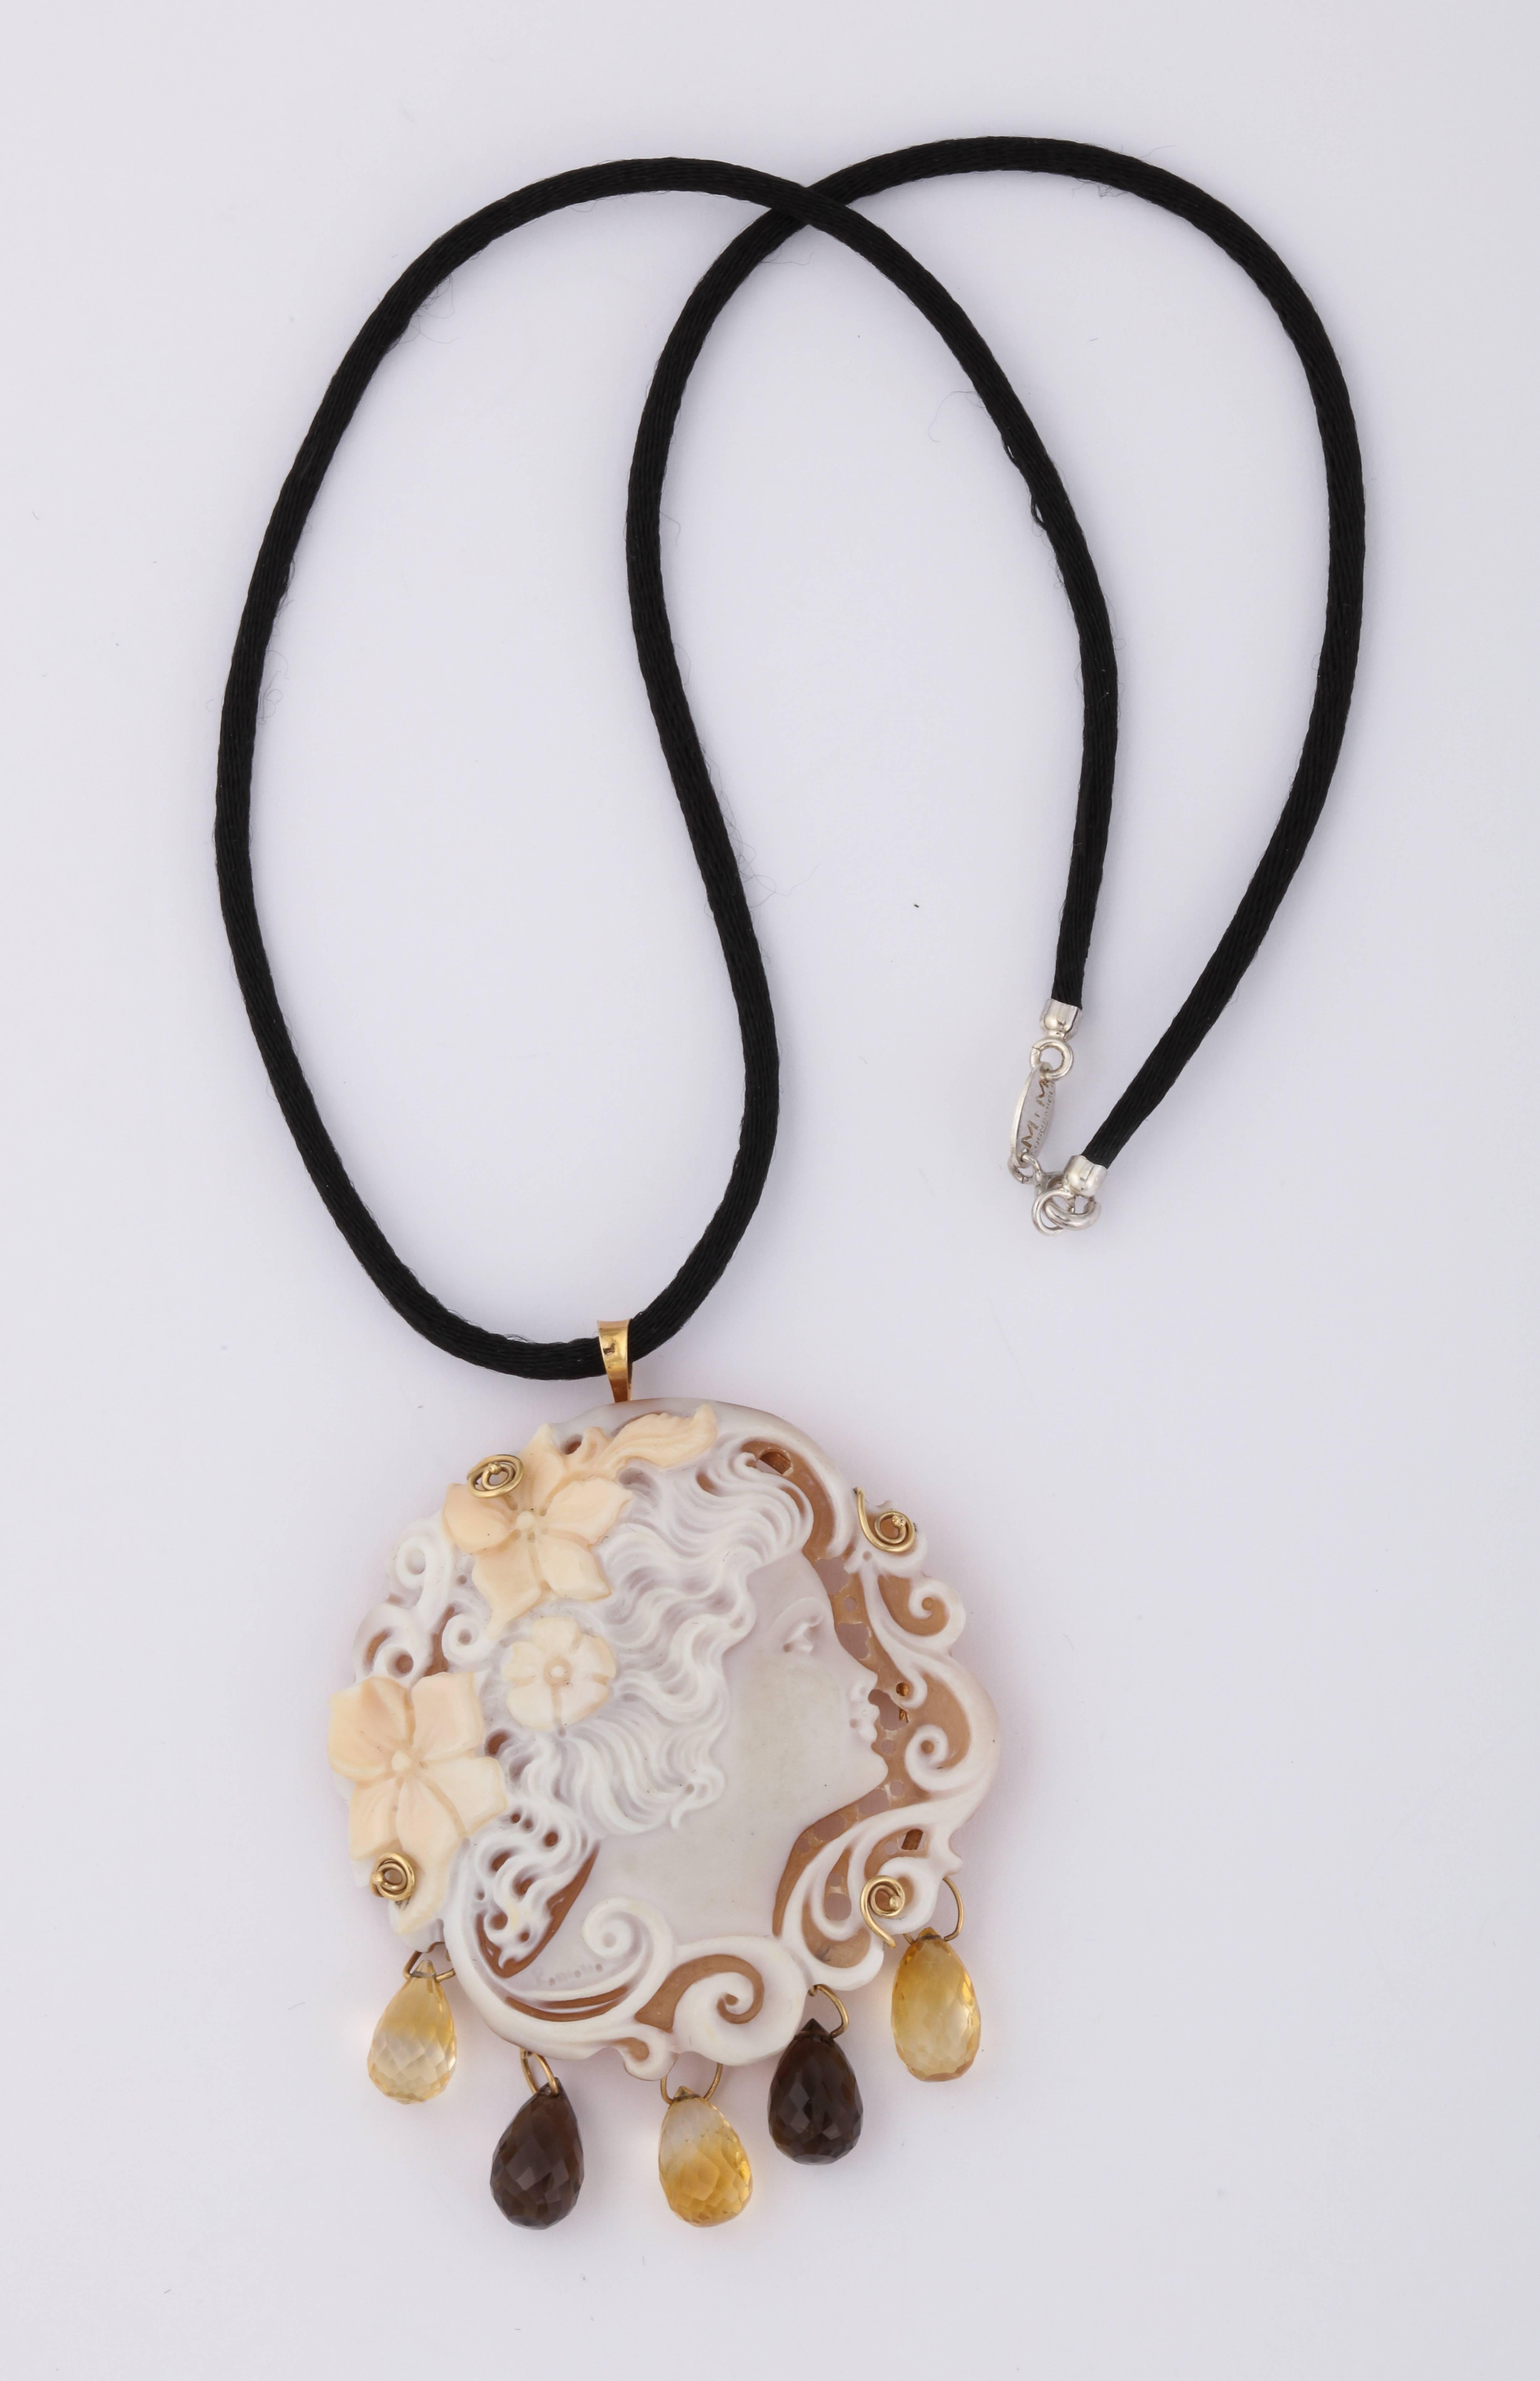 Hand carved sardonyx shell set in 14Kt gold pin/pendant with citrine and smokey quartz drops.